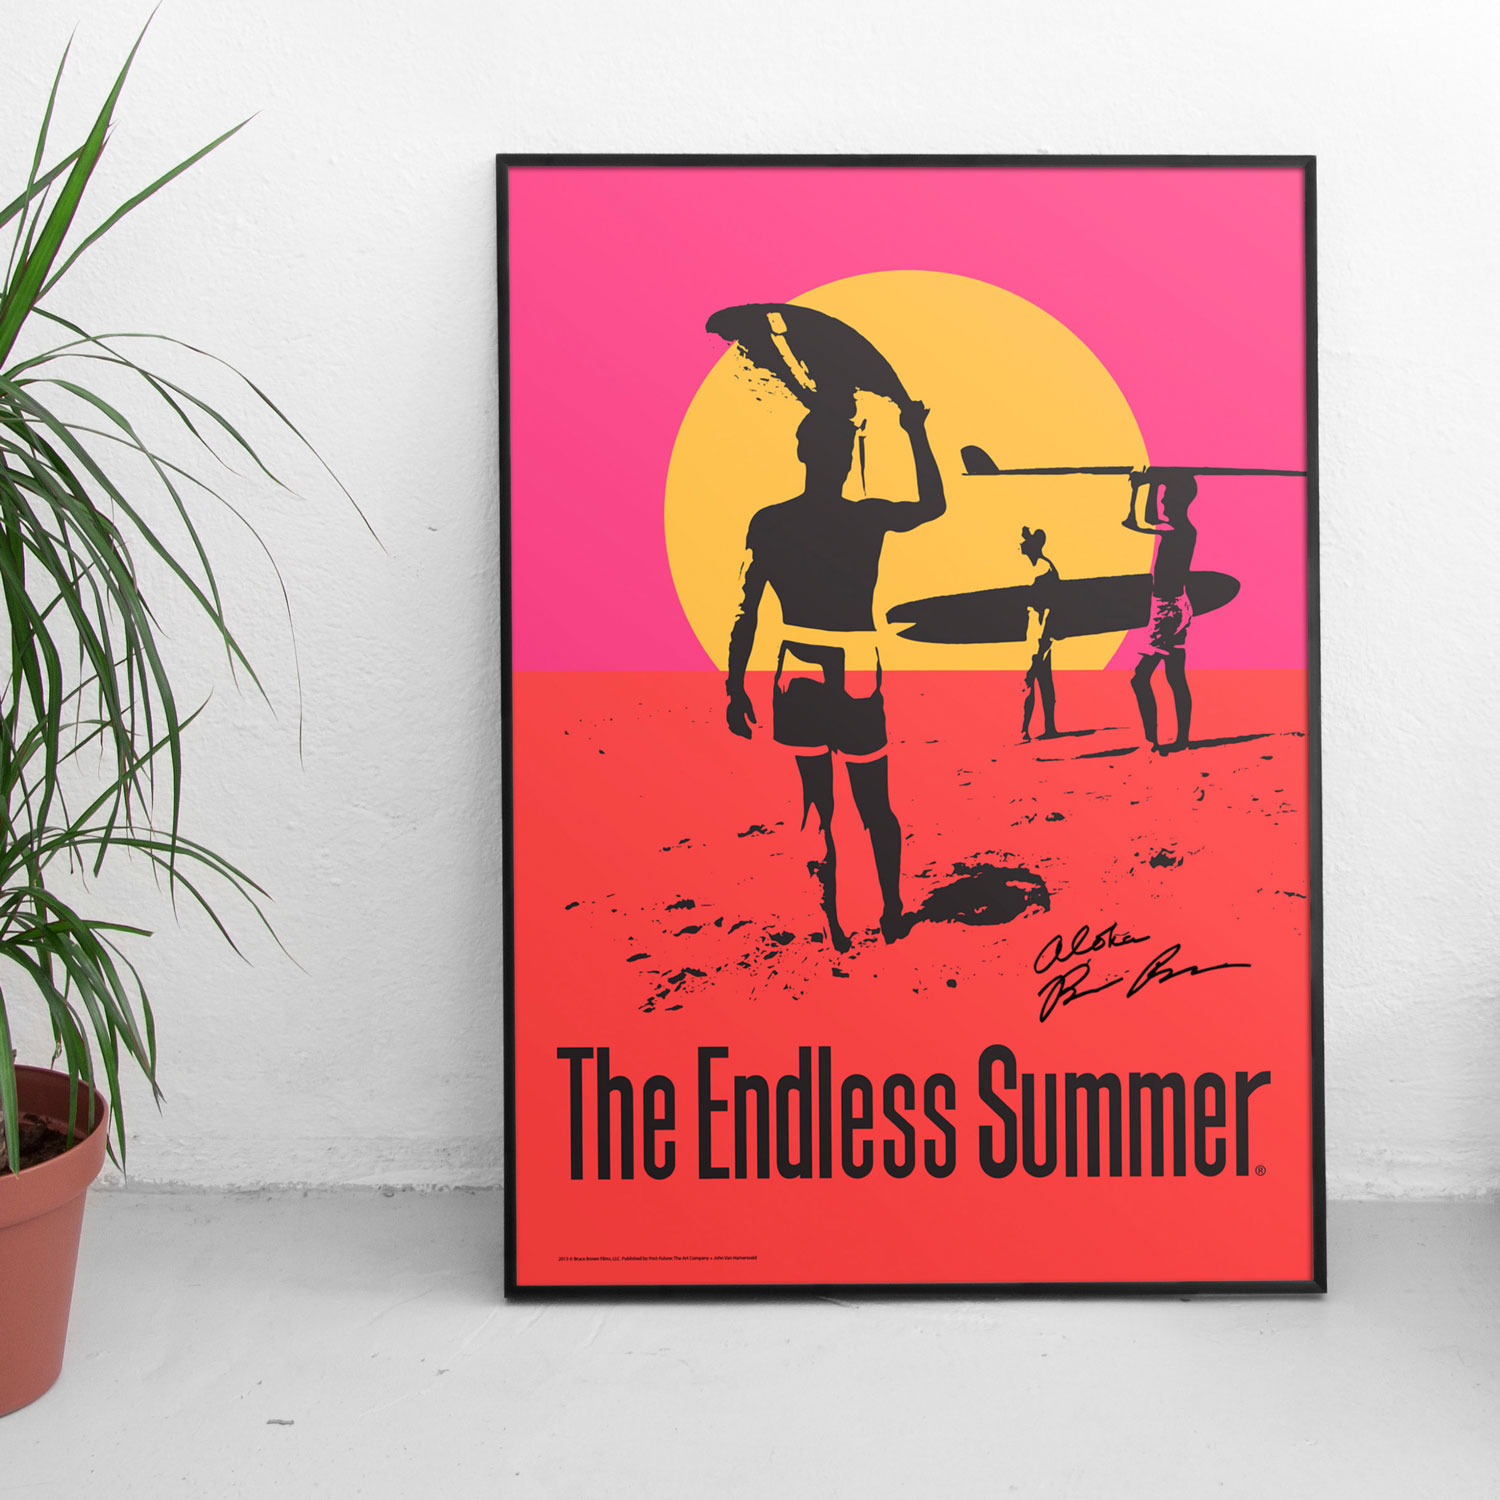 The Endless Summer - Wikipedia